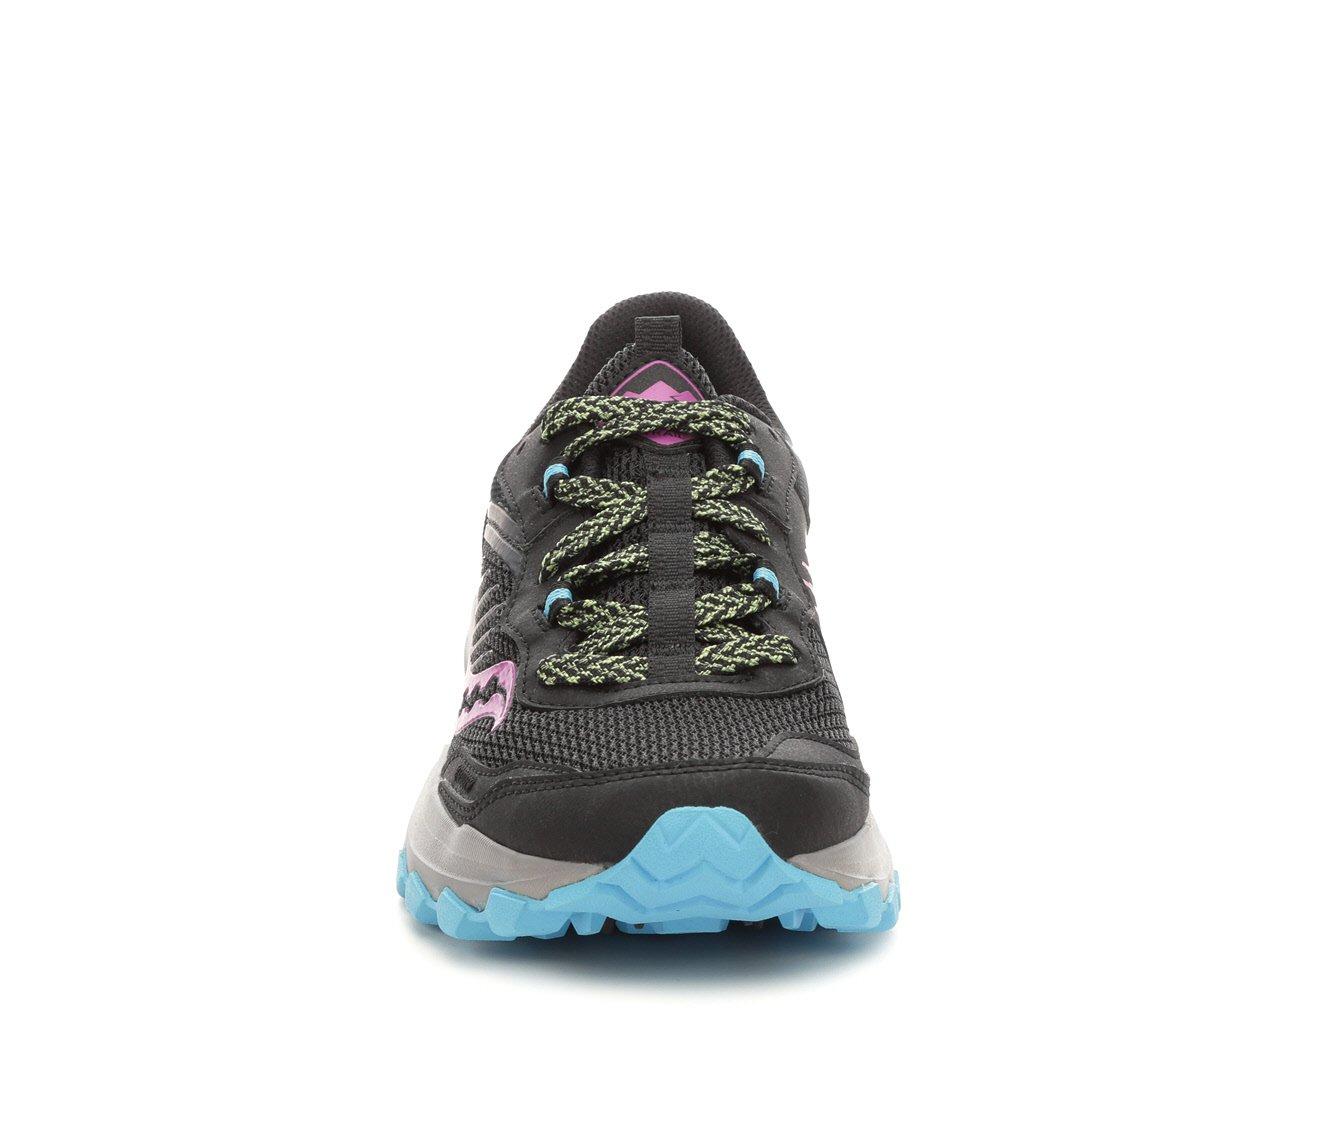 Women's Saucony Excursion TR 15 Trail Running Shoes